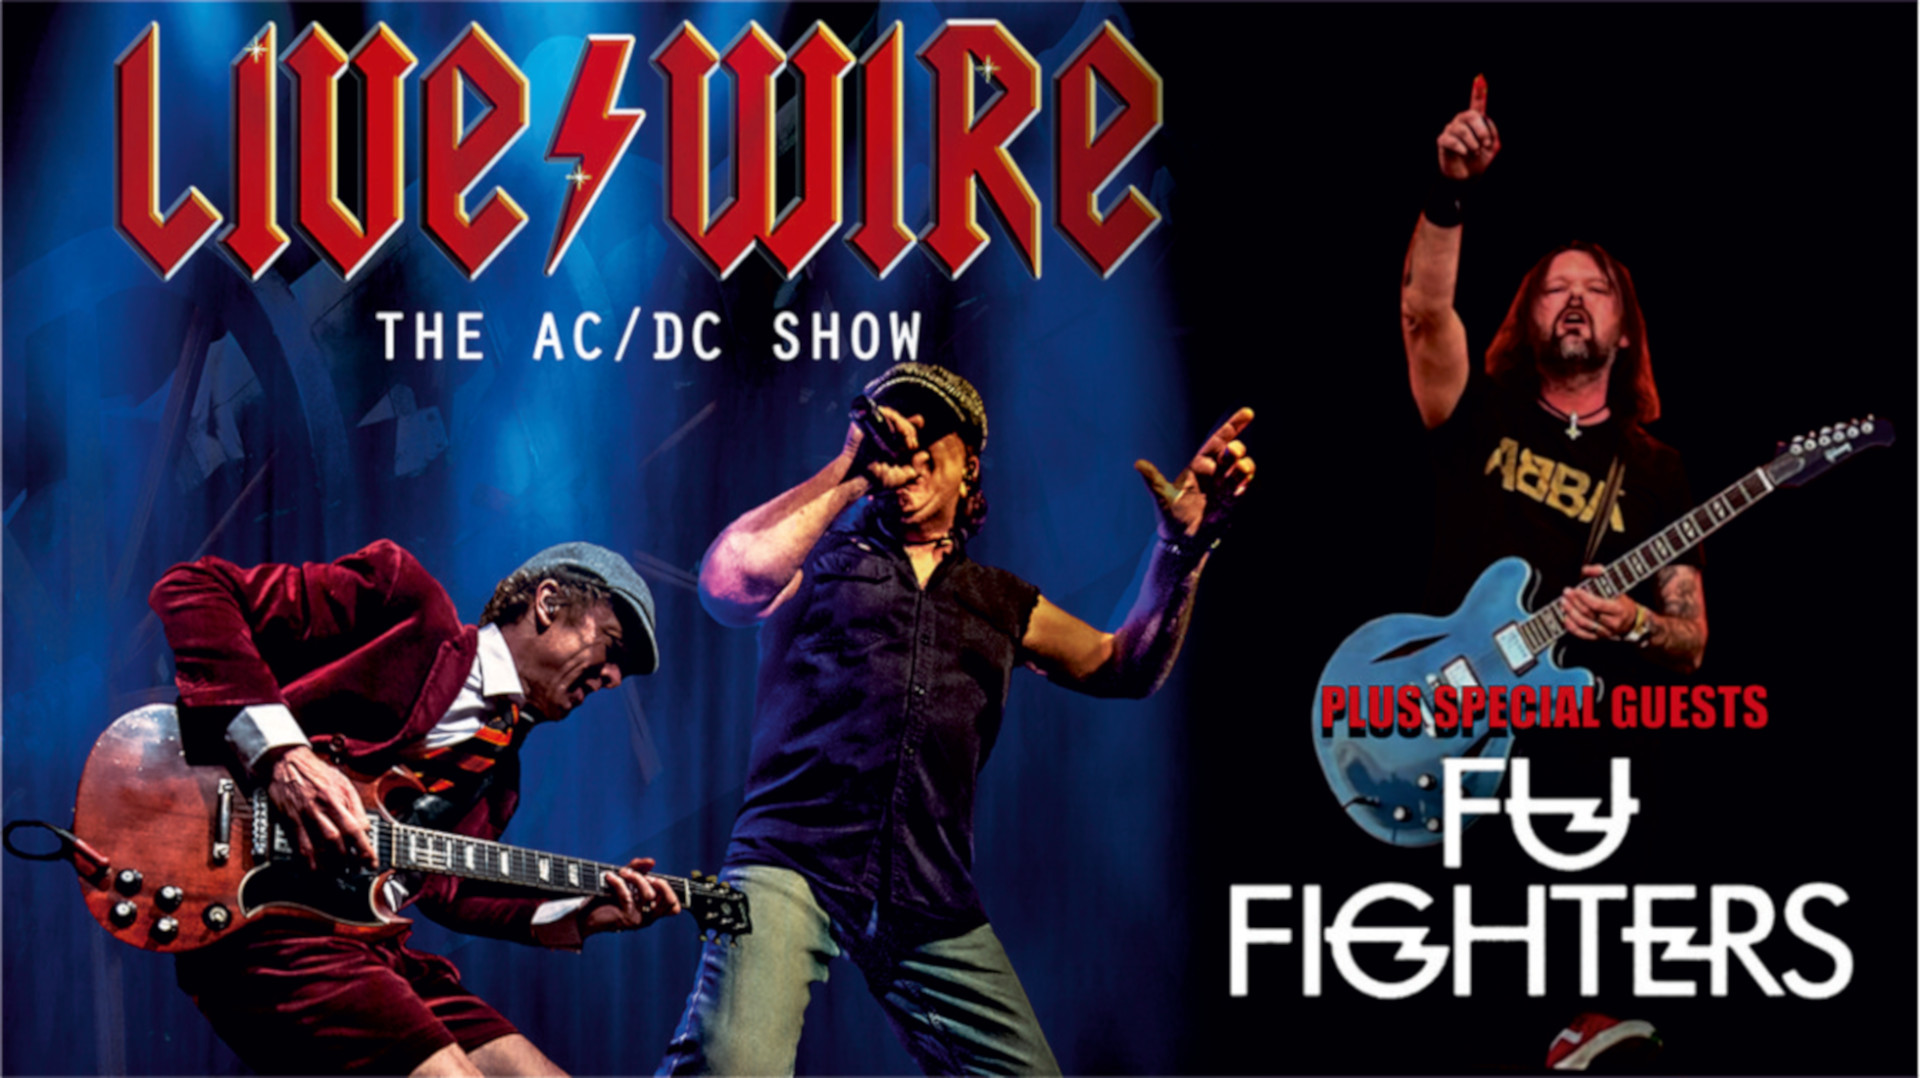 Livewire - AC/DC Tribute at Northwich Memorial Court event tickets from  TicketSource